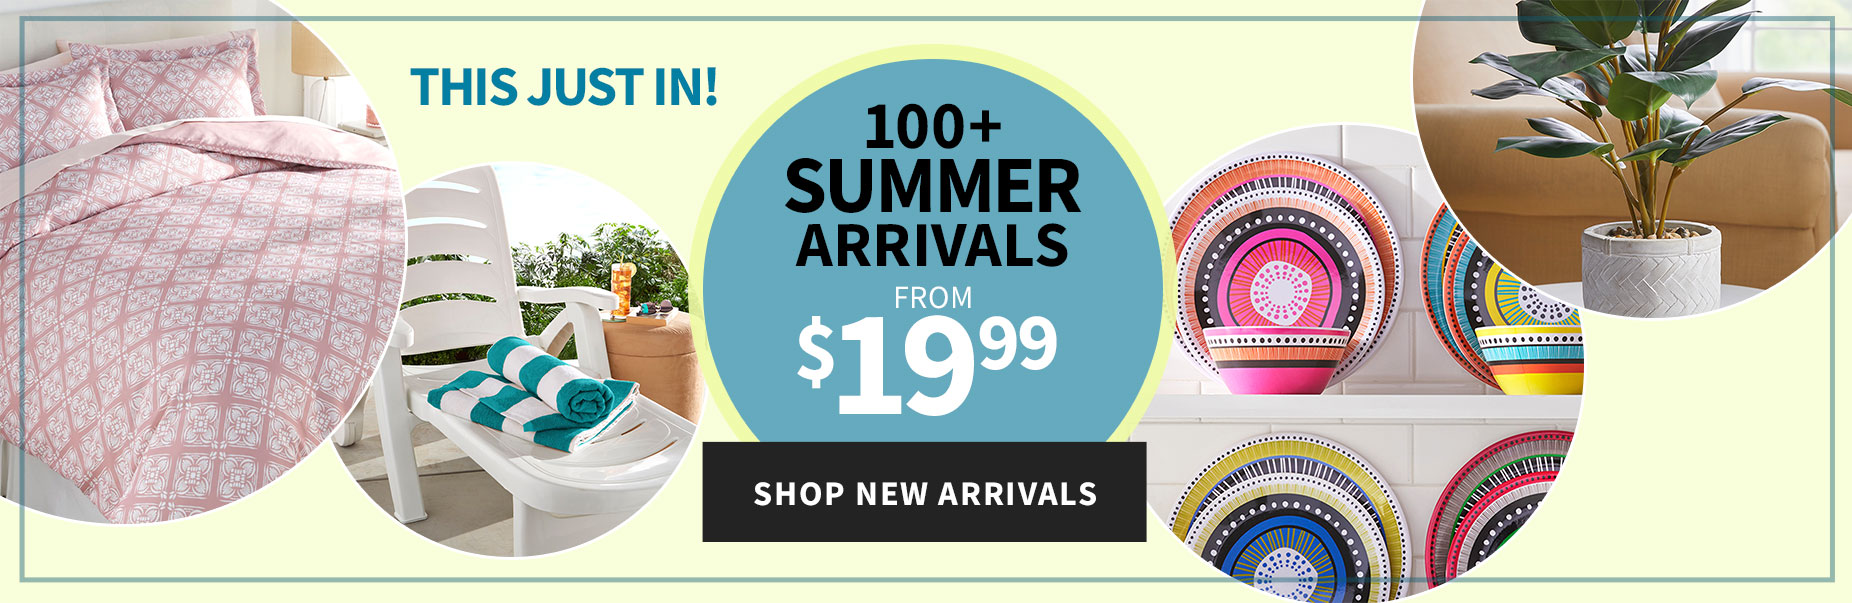 Spring arrivals from $19.99.